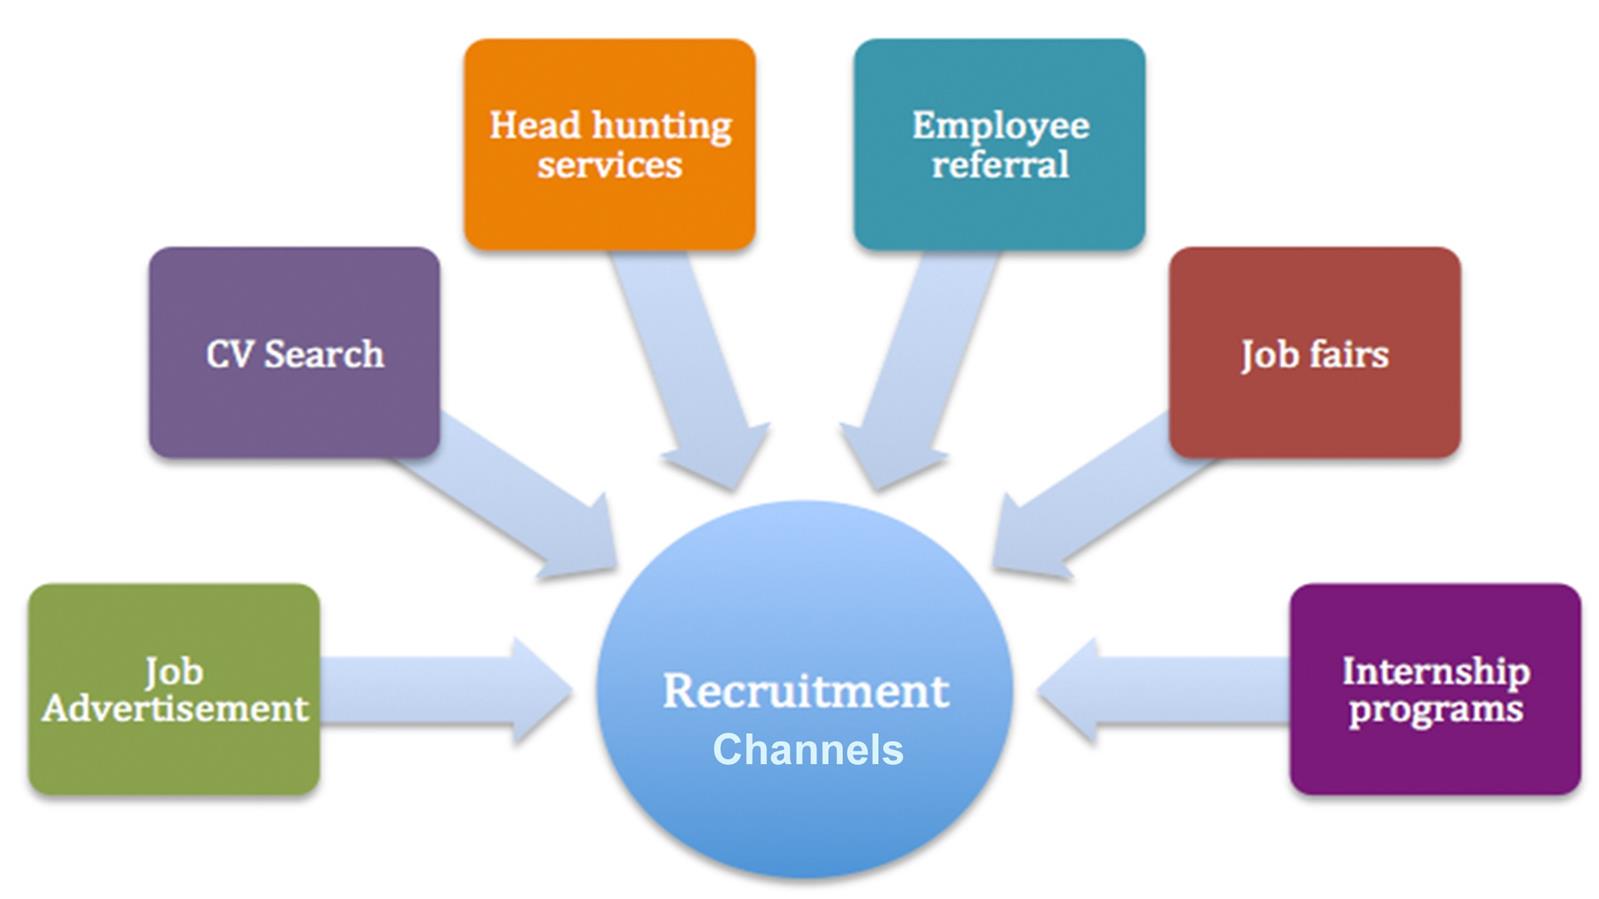 The recent types of popular recruitment channels